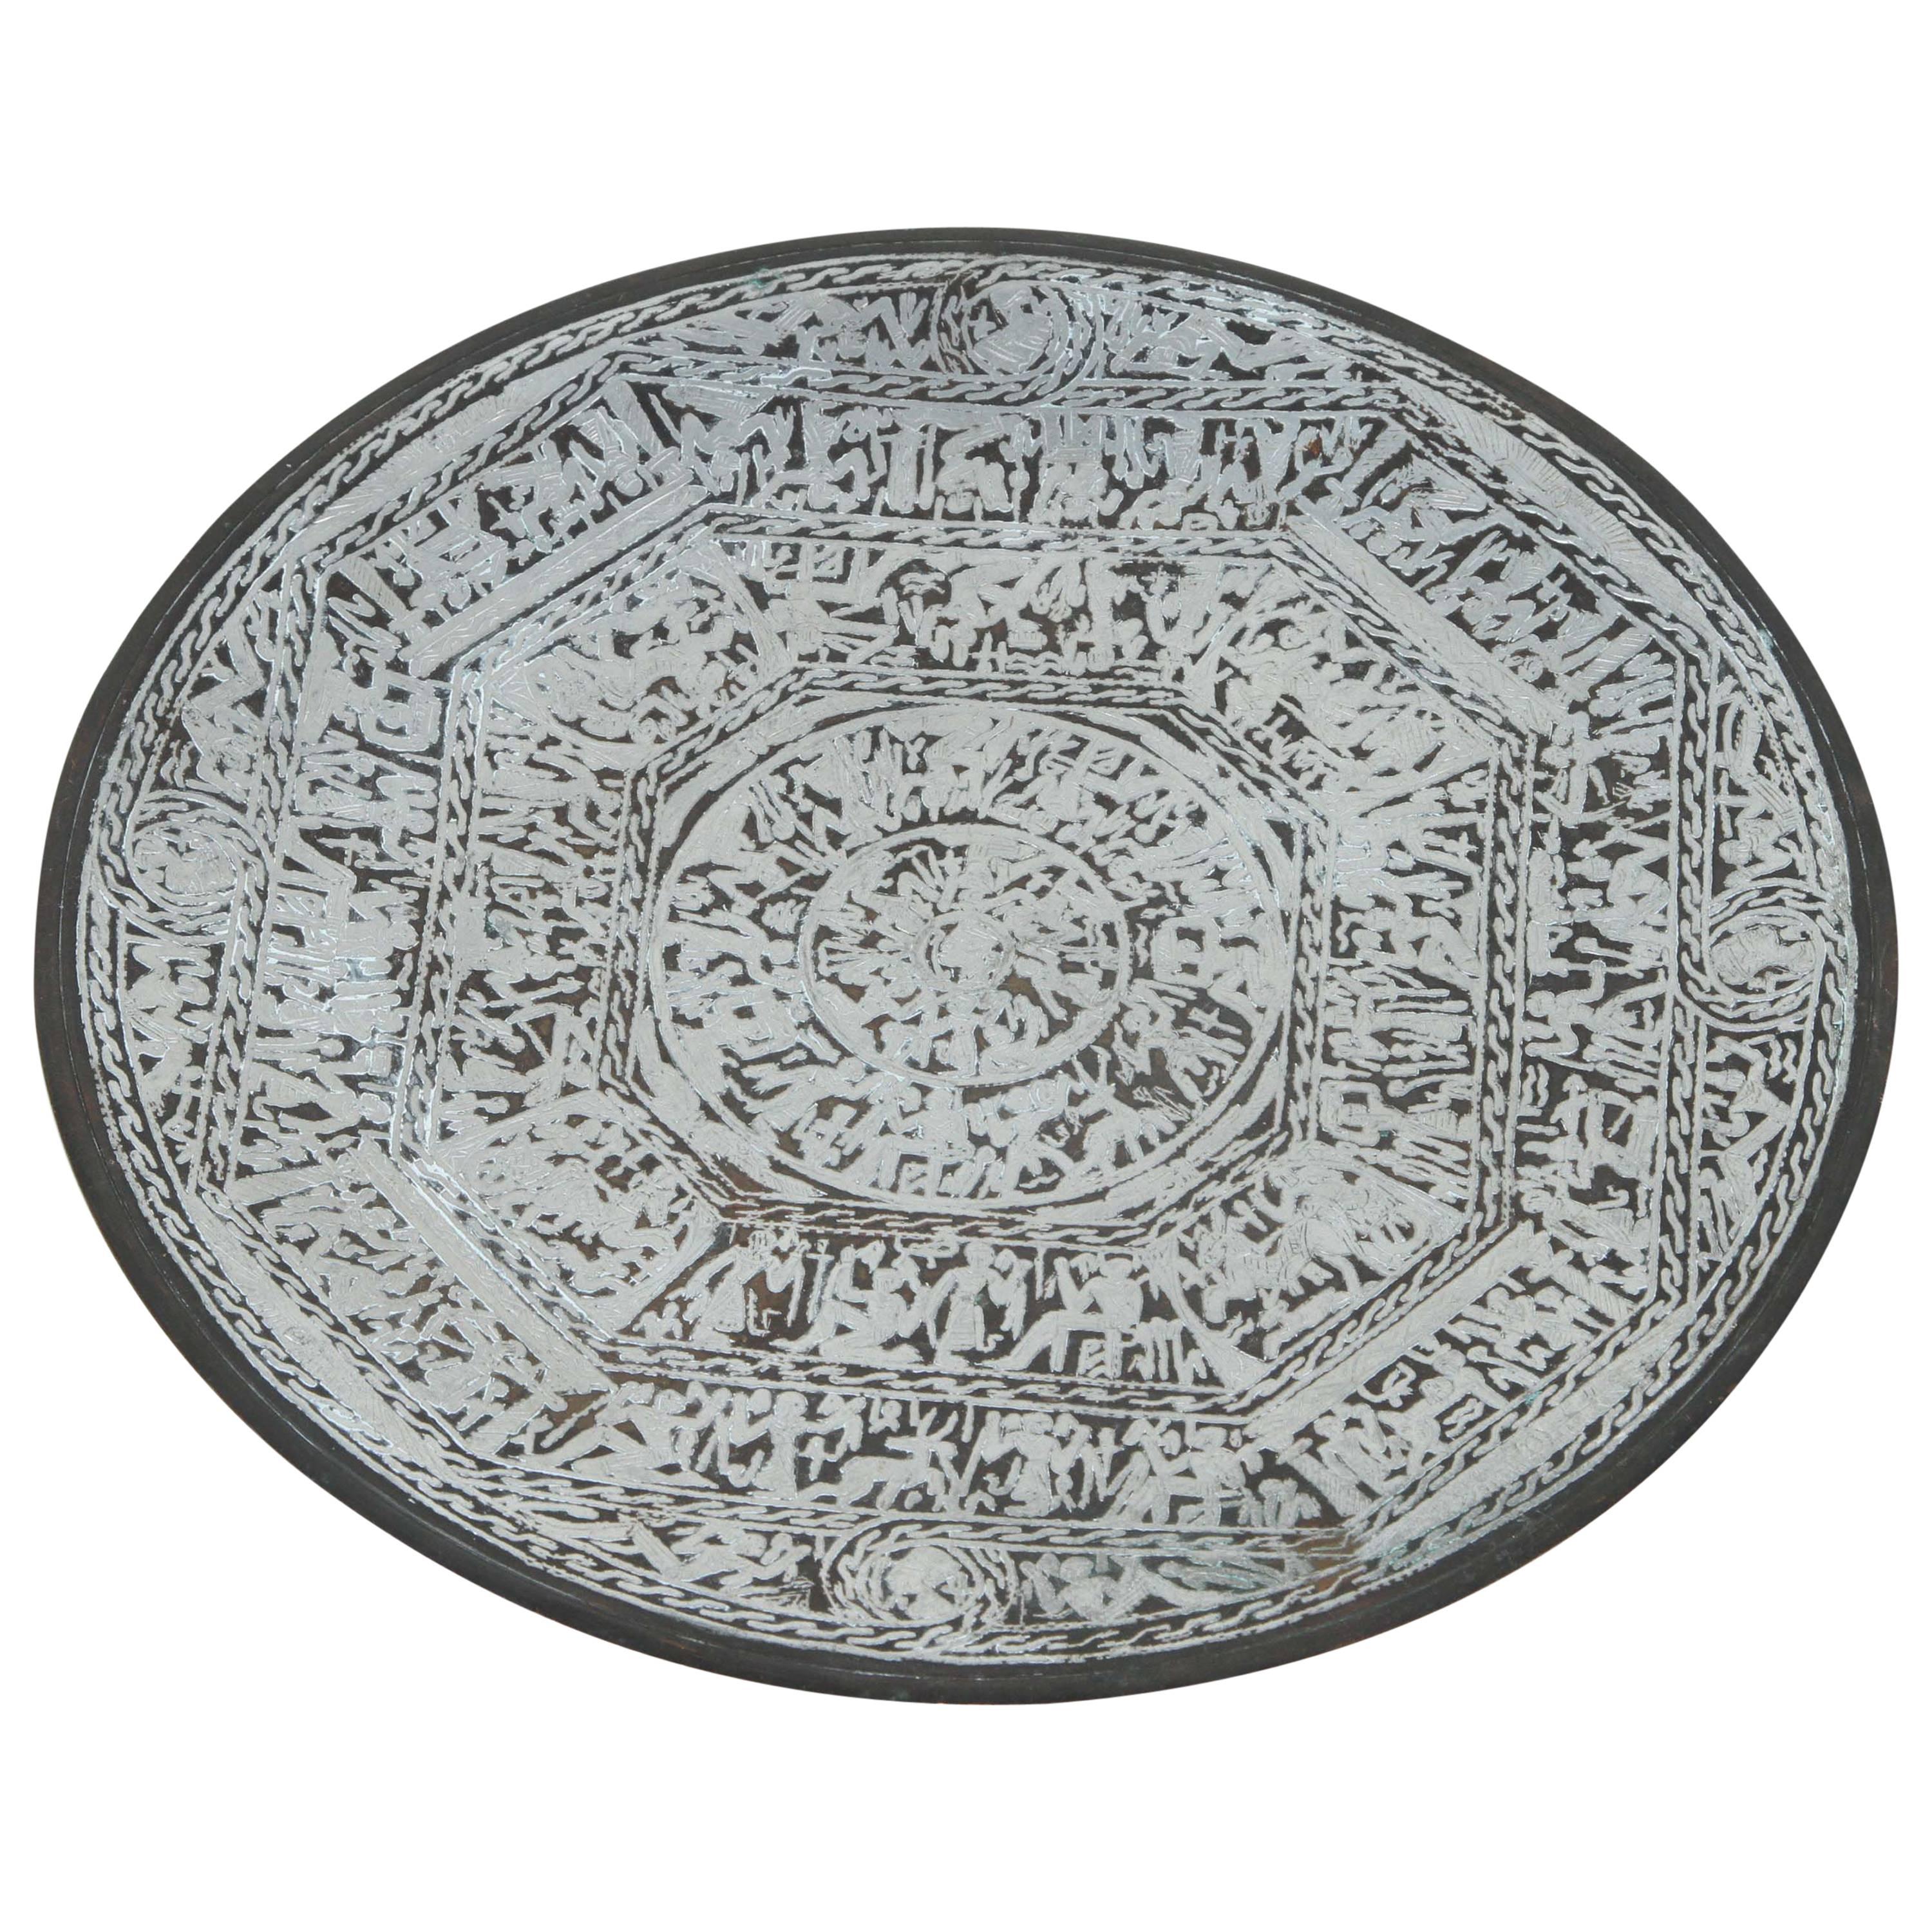 Egyptian Revival Brass Tray Overlay with Silver Designs and Hieroglyphics